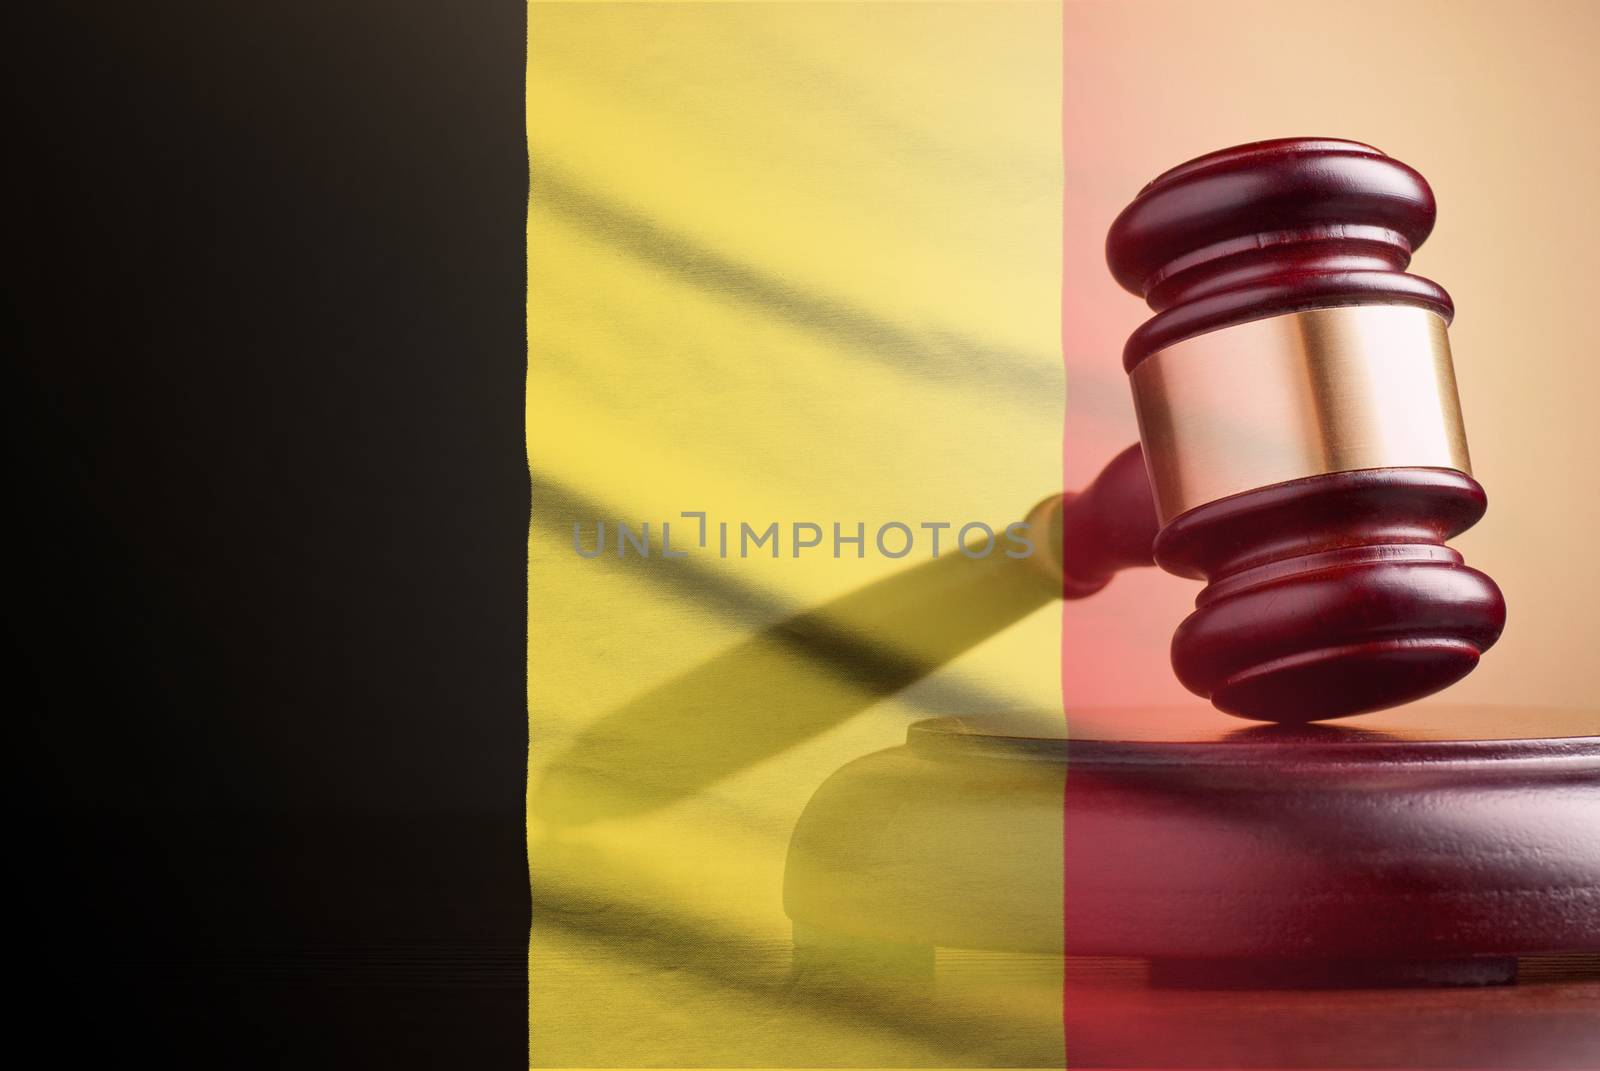 Lawyers wooden gavel resting on its plinth over the flag of Belgium in a concept of the courts, legality and law and order